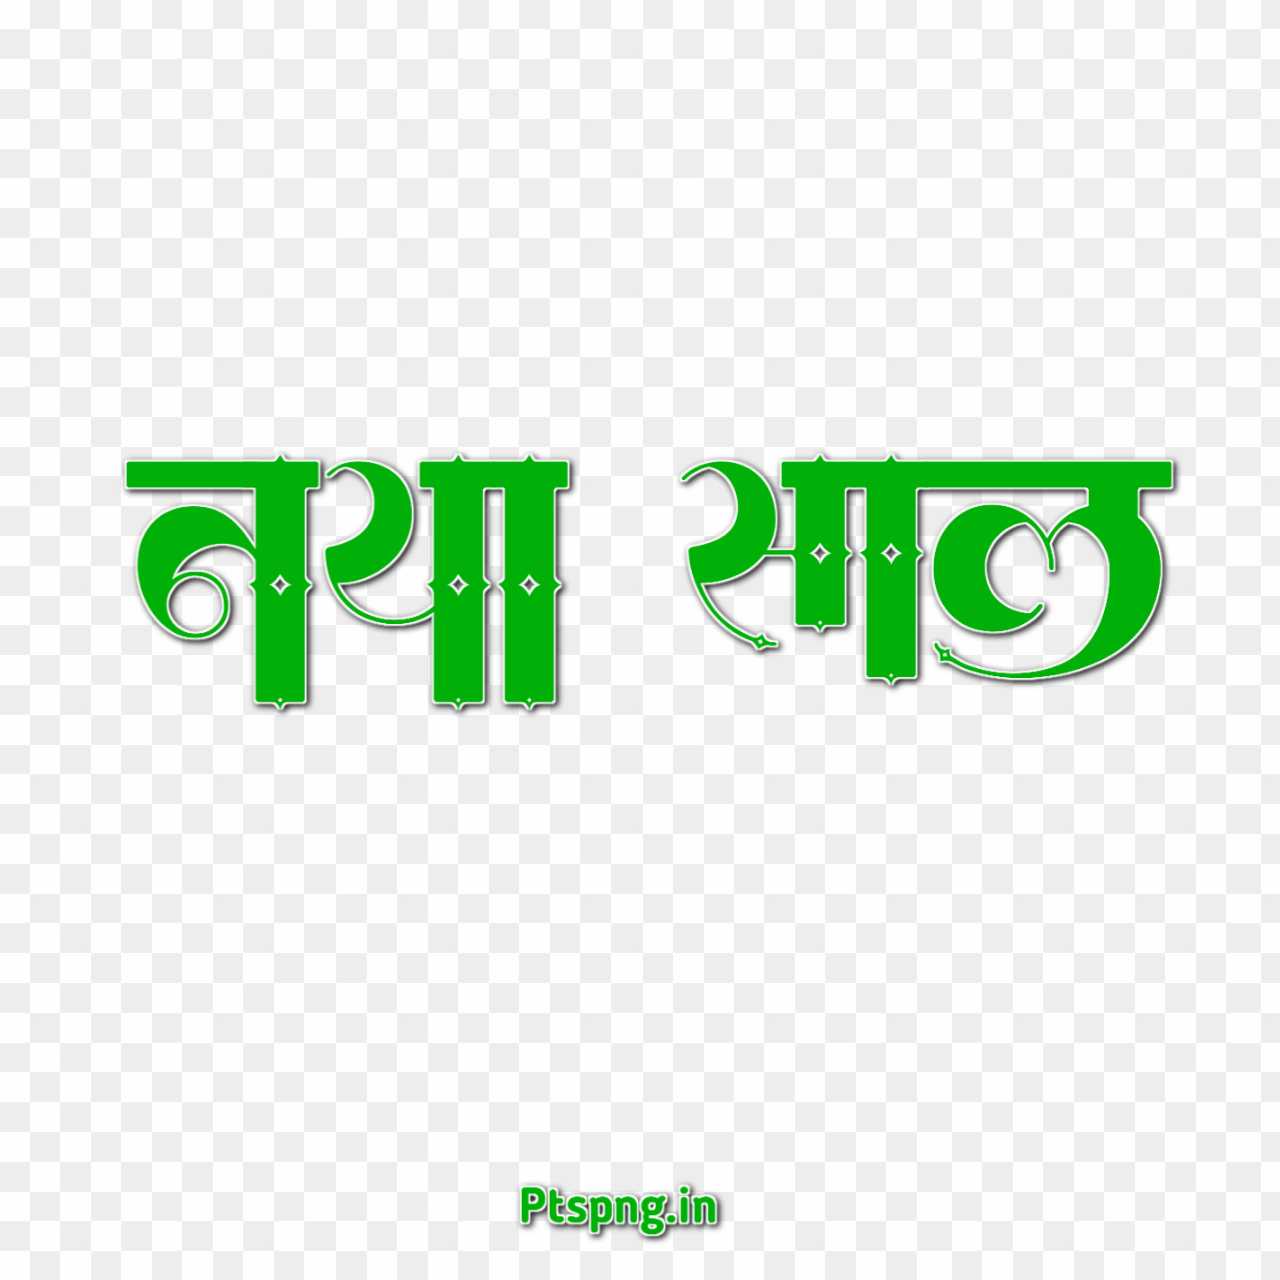 Happy New year text PNG images in Hindi